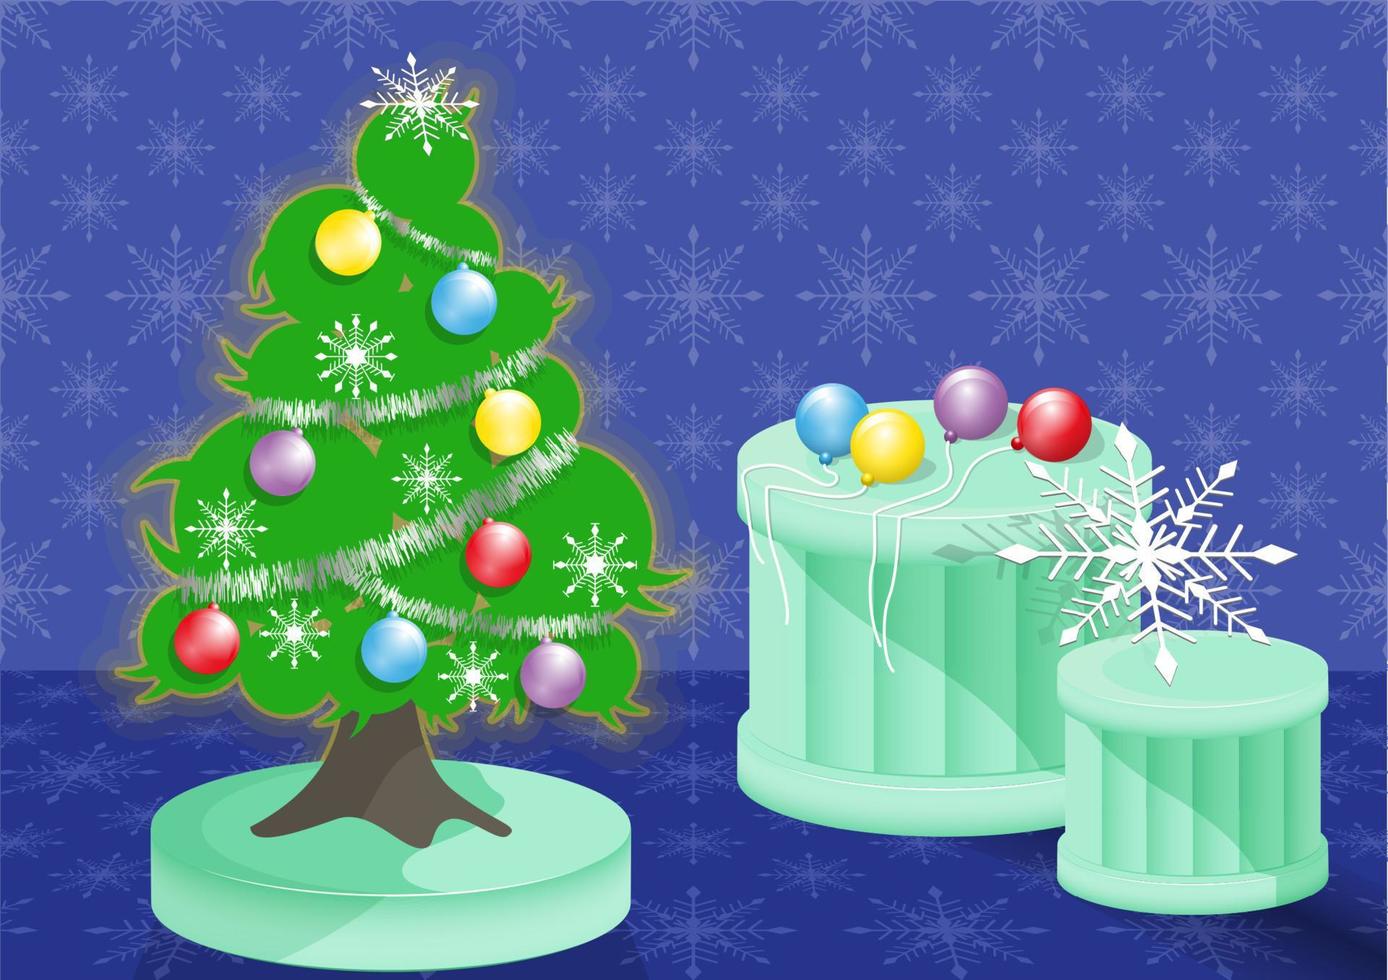 Christmas tree on the podium Decorated with Christmas balls, snowflakes, Christmas pine strings. on a blue background with a snowflake pattern, vector illustration.